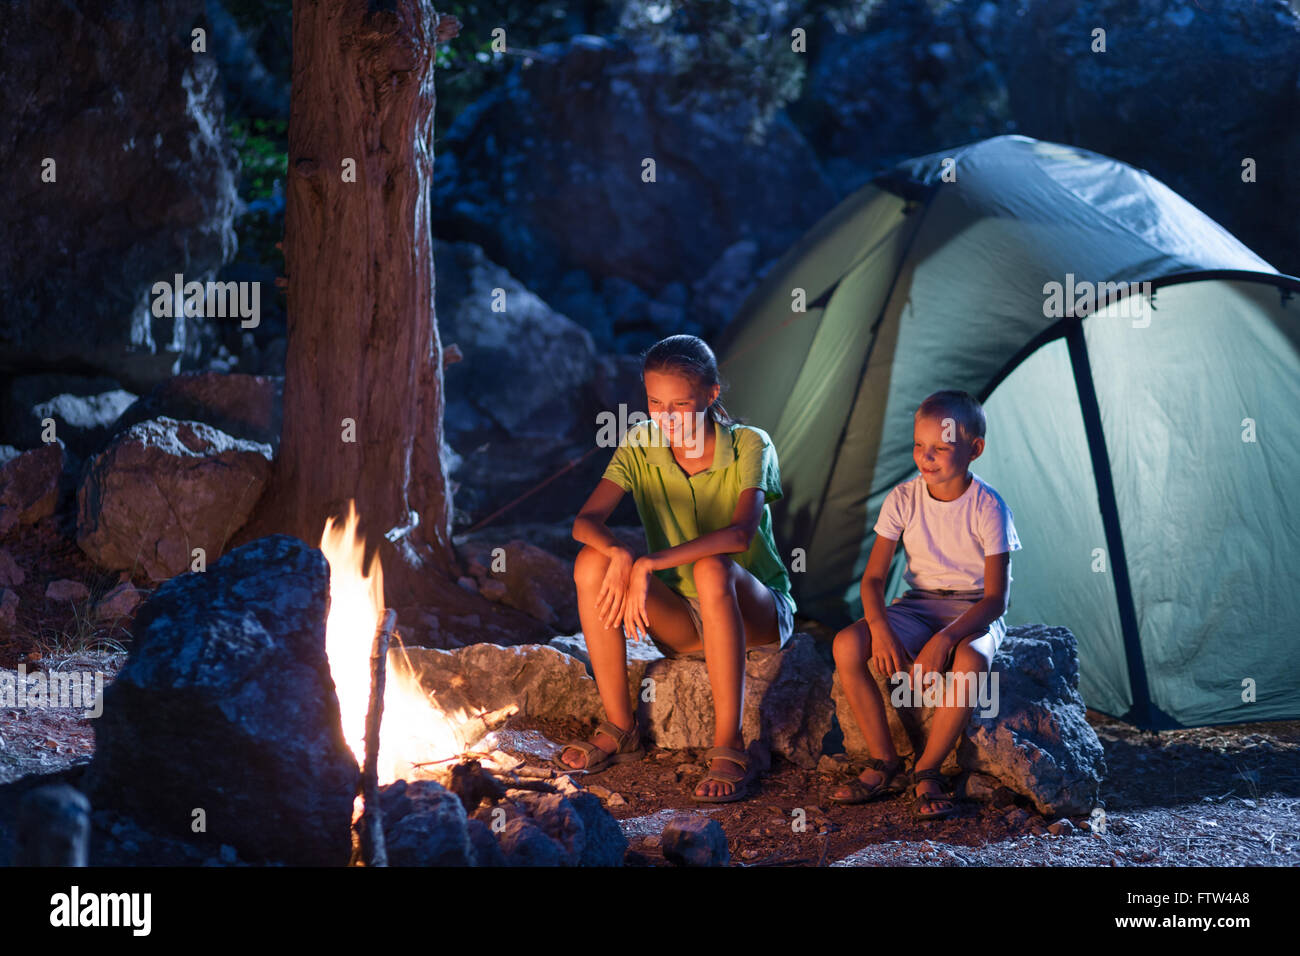 Sister with her brother at the camping at night Stock Photo